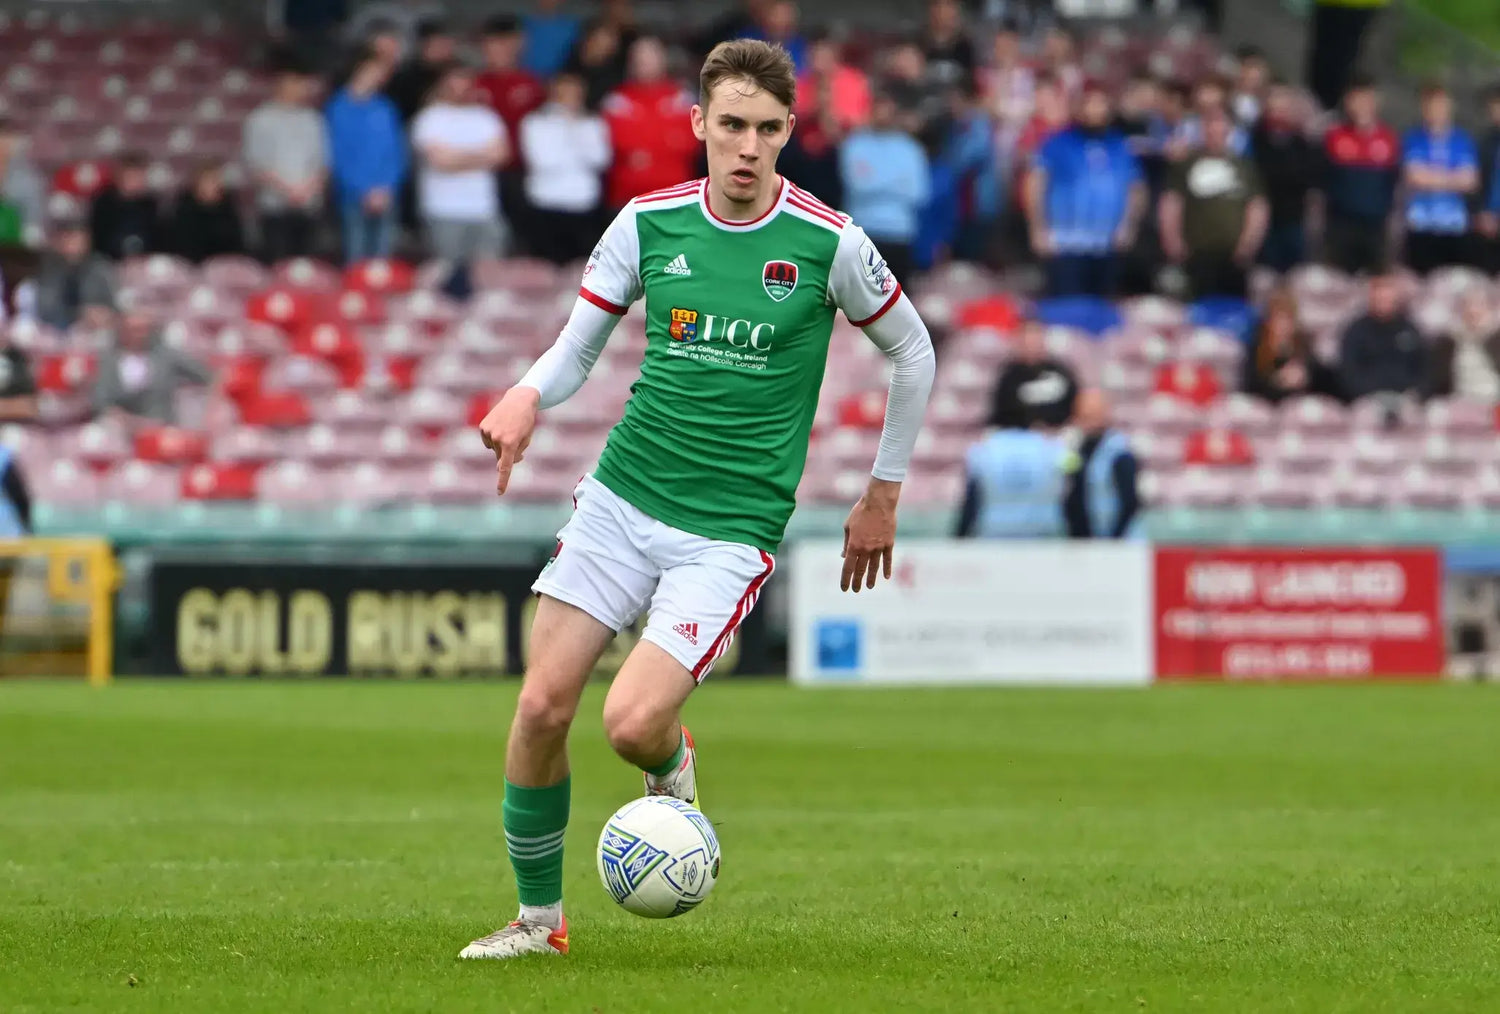 Healy Loan Extended!